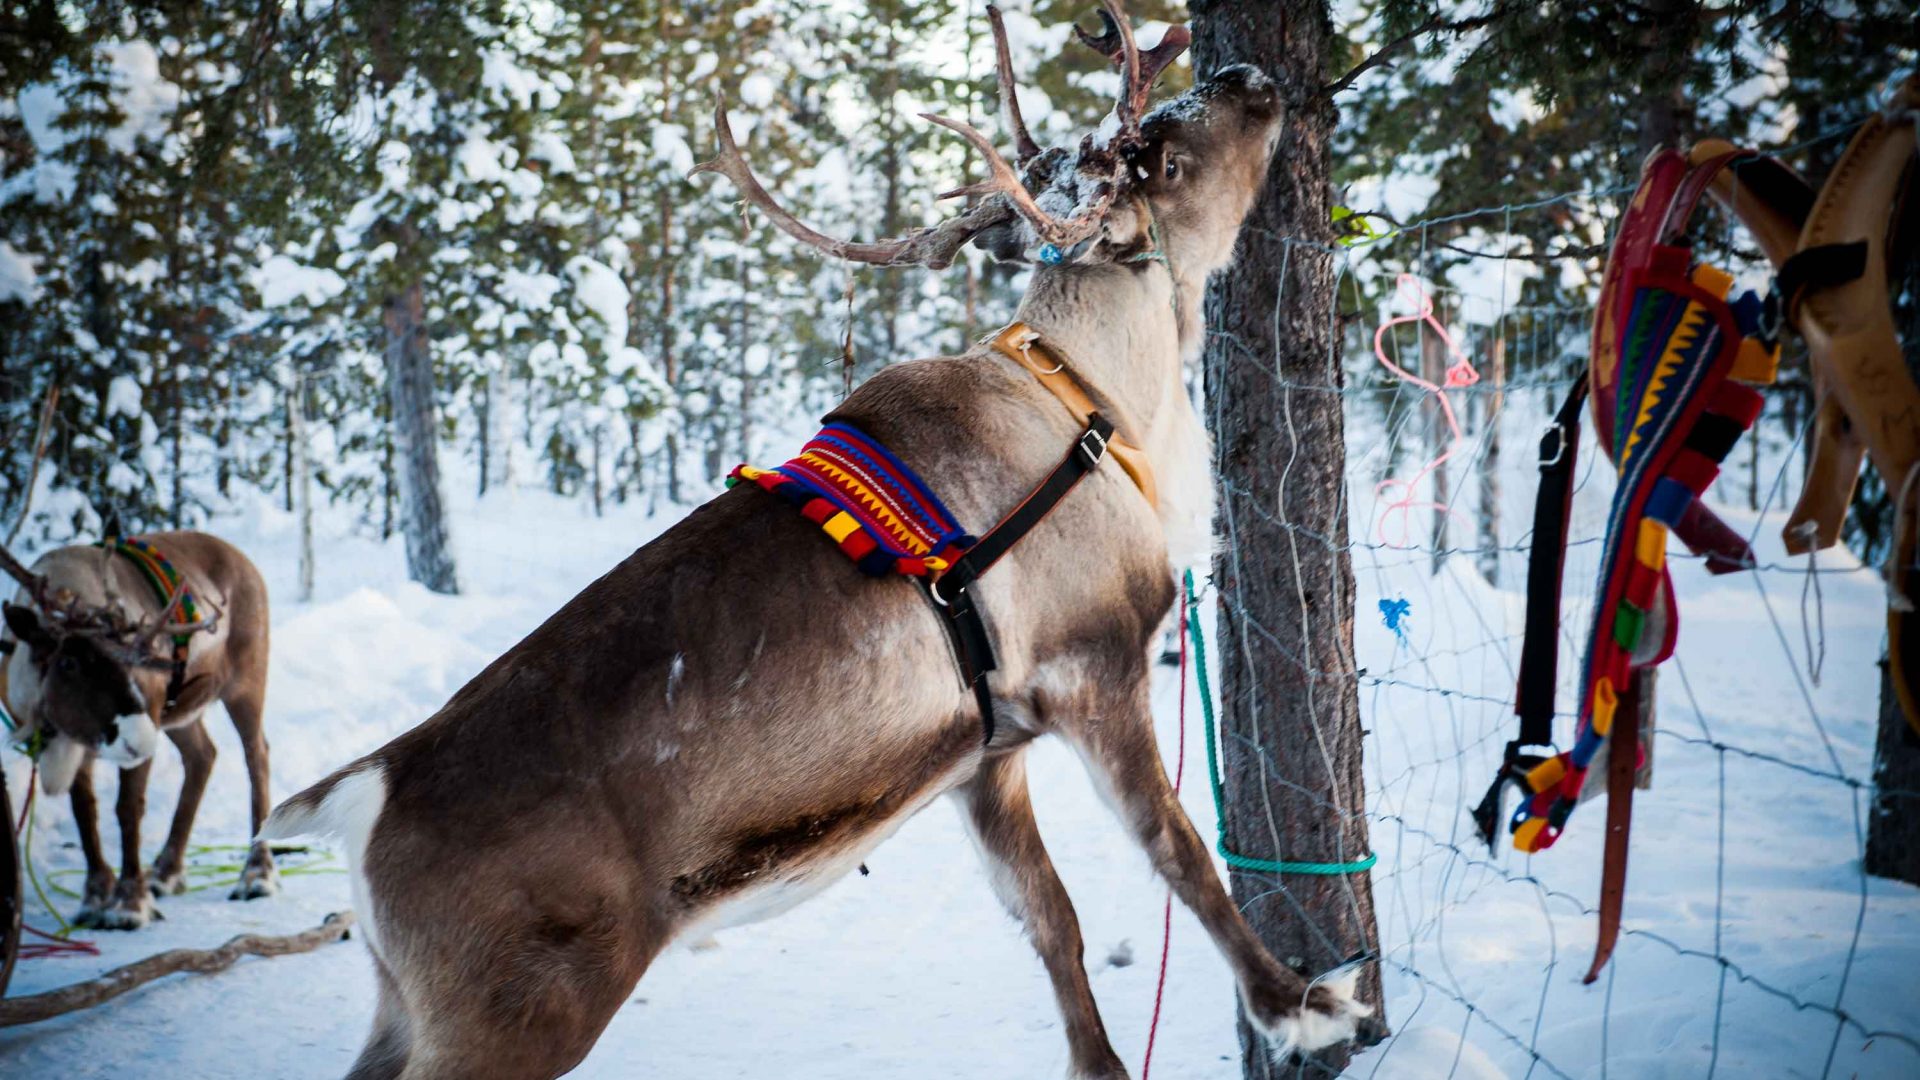 Reindeer at Nutti Sámi Siida, a company which organizes experiences that bring travelers closer to reindeer and the Sami culture.